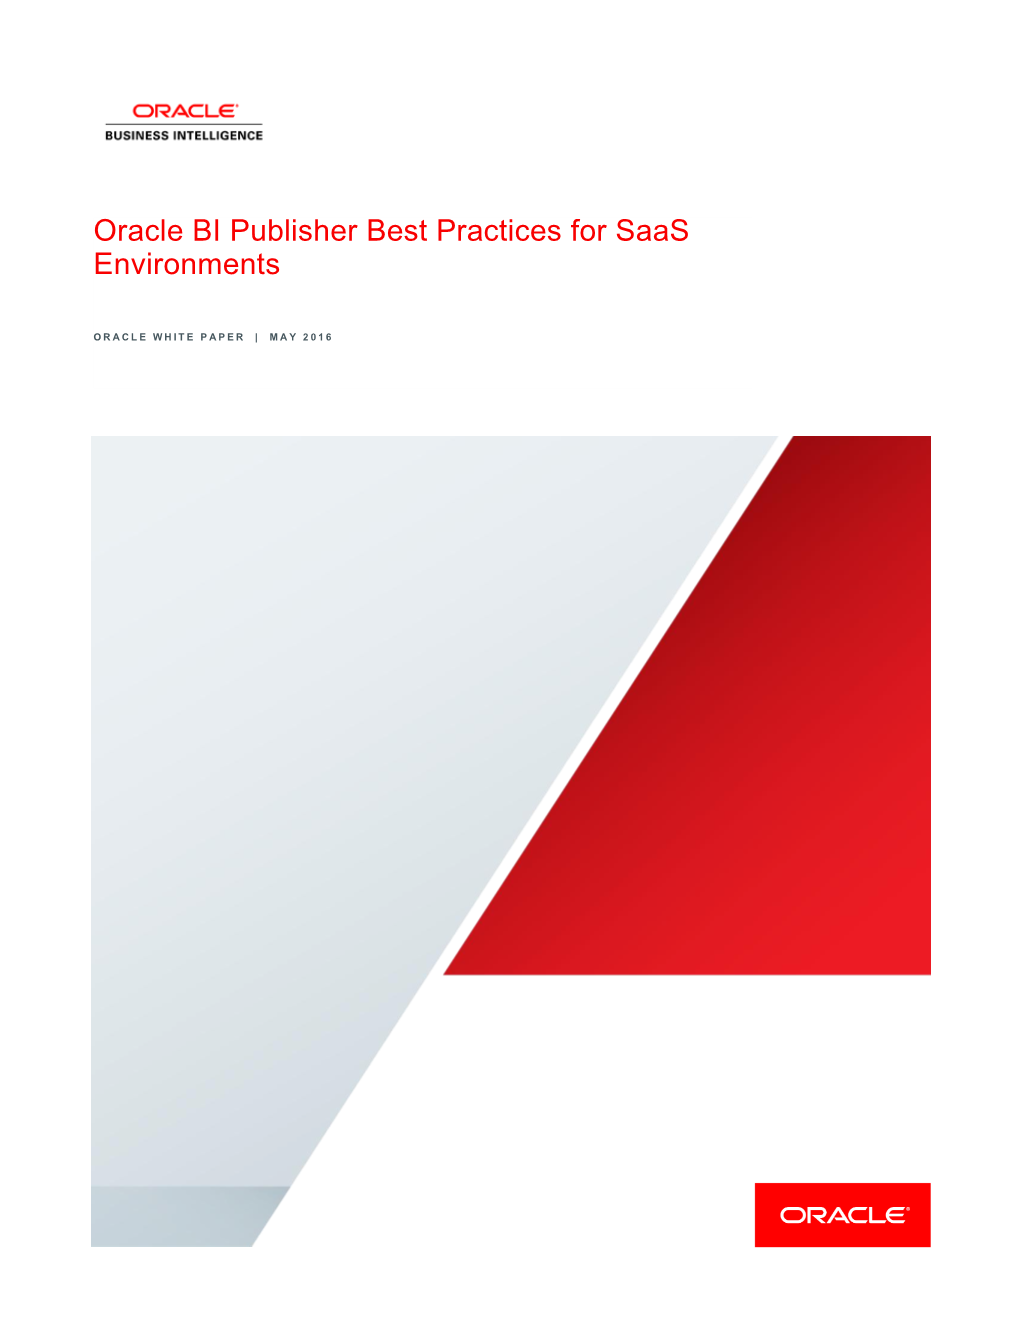 Oracle BI Publisher Best Practices for Saas Environments